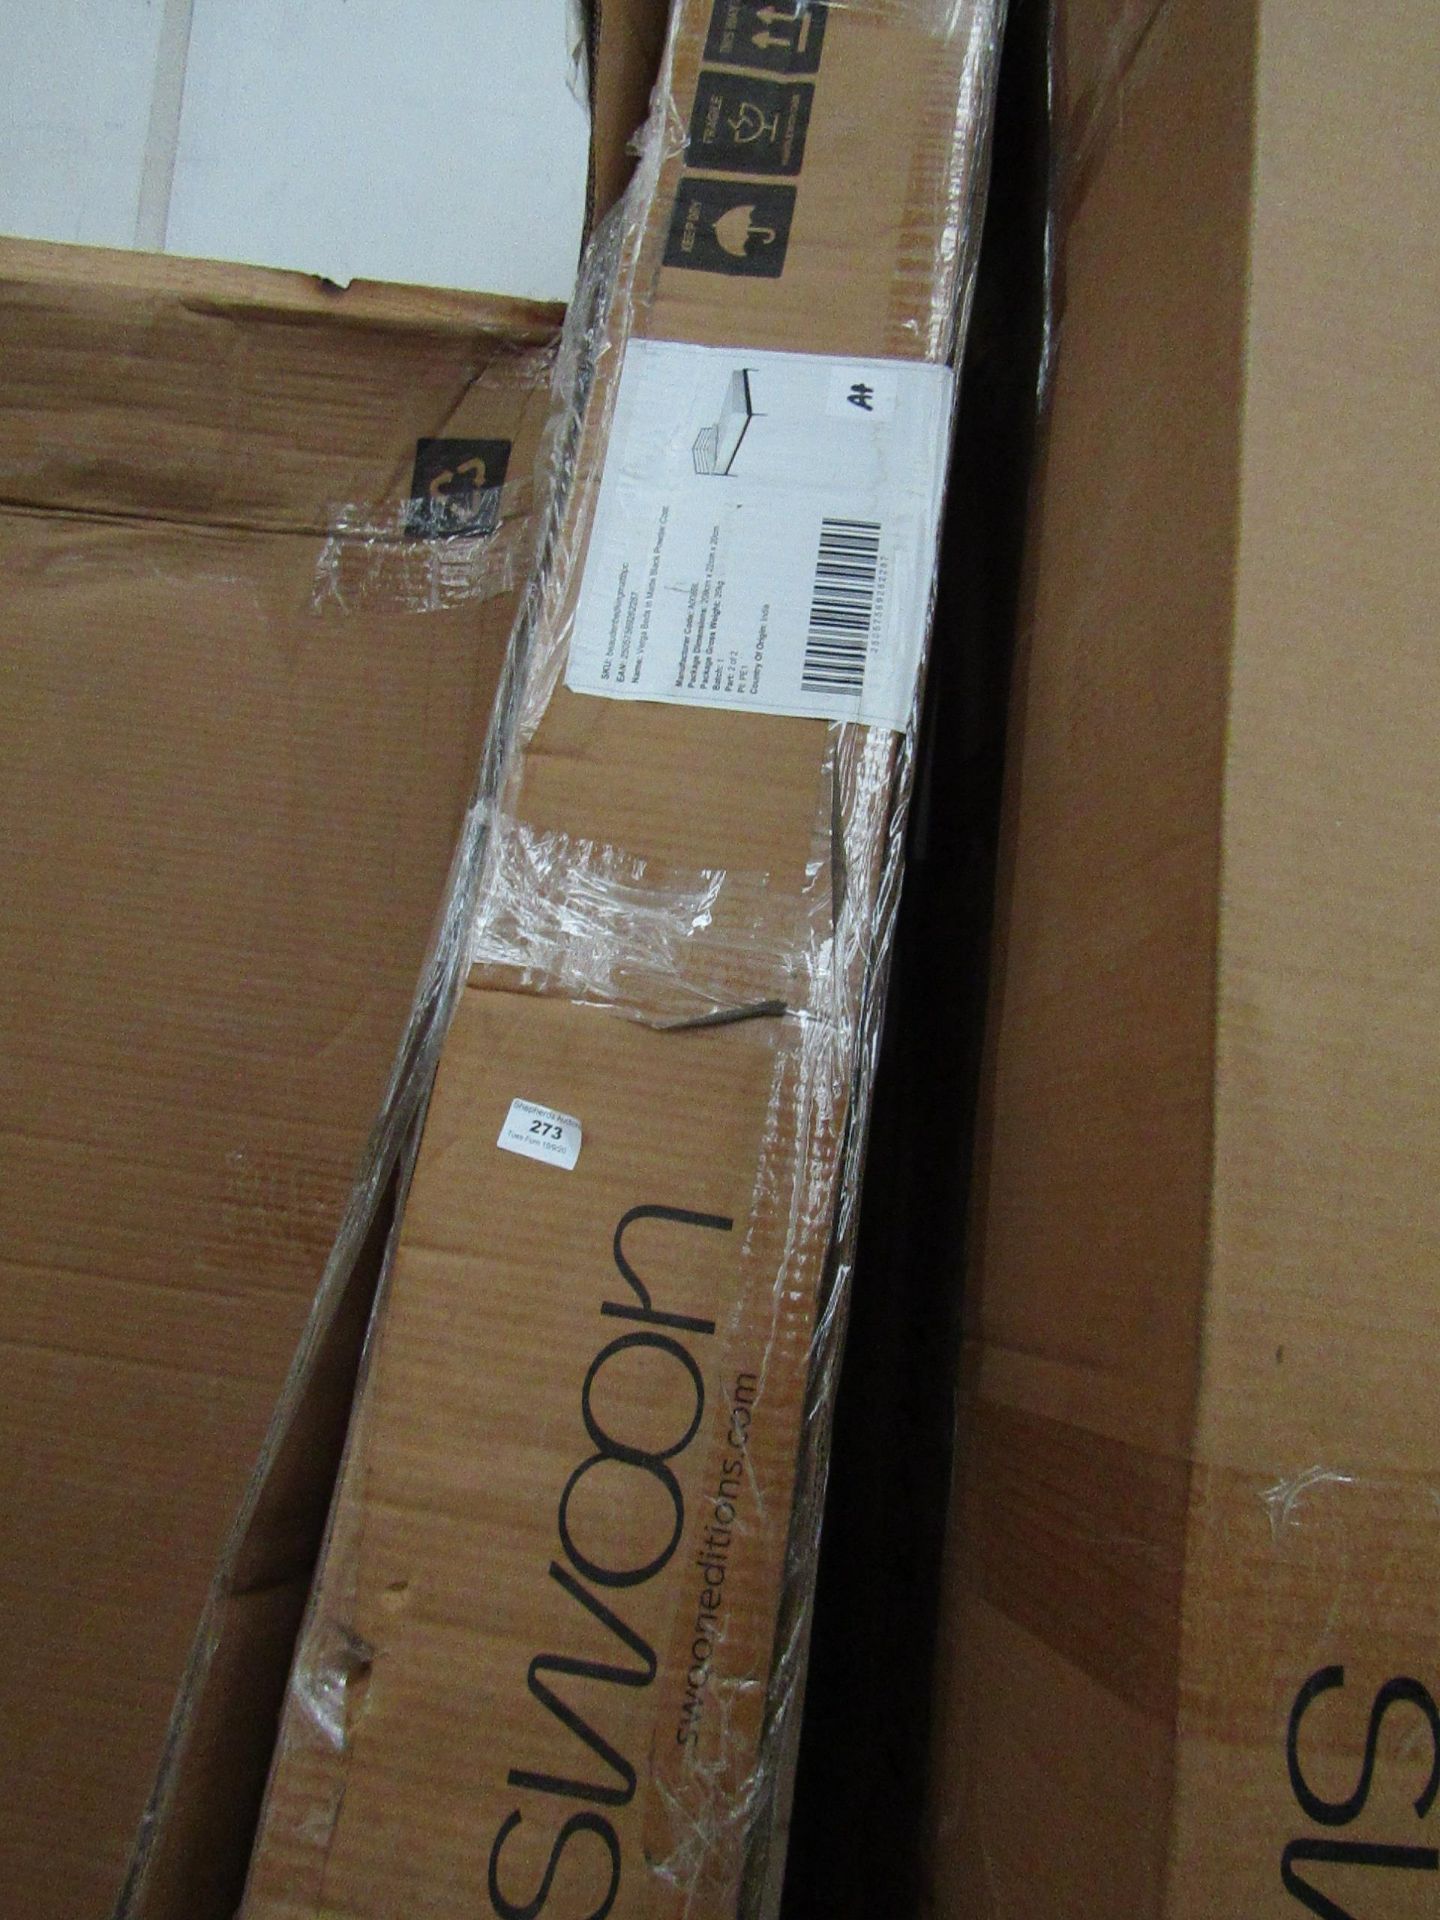 | 1X | SWOON VARGA  MATT BLACK KING BED FRAME, IN 2 BOXES | UNCHECKED FOR COMPLETENESS AND PARTS |